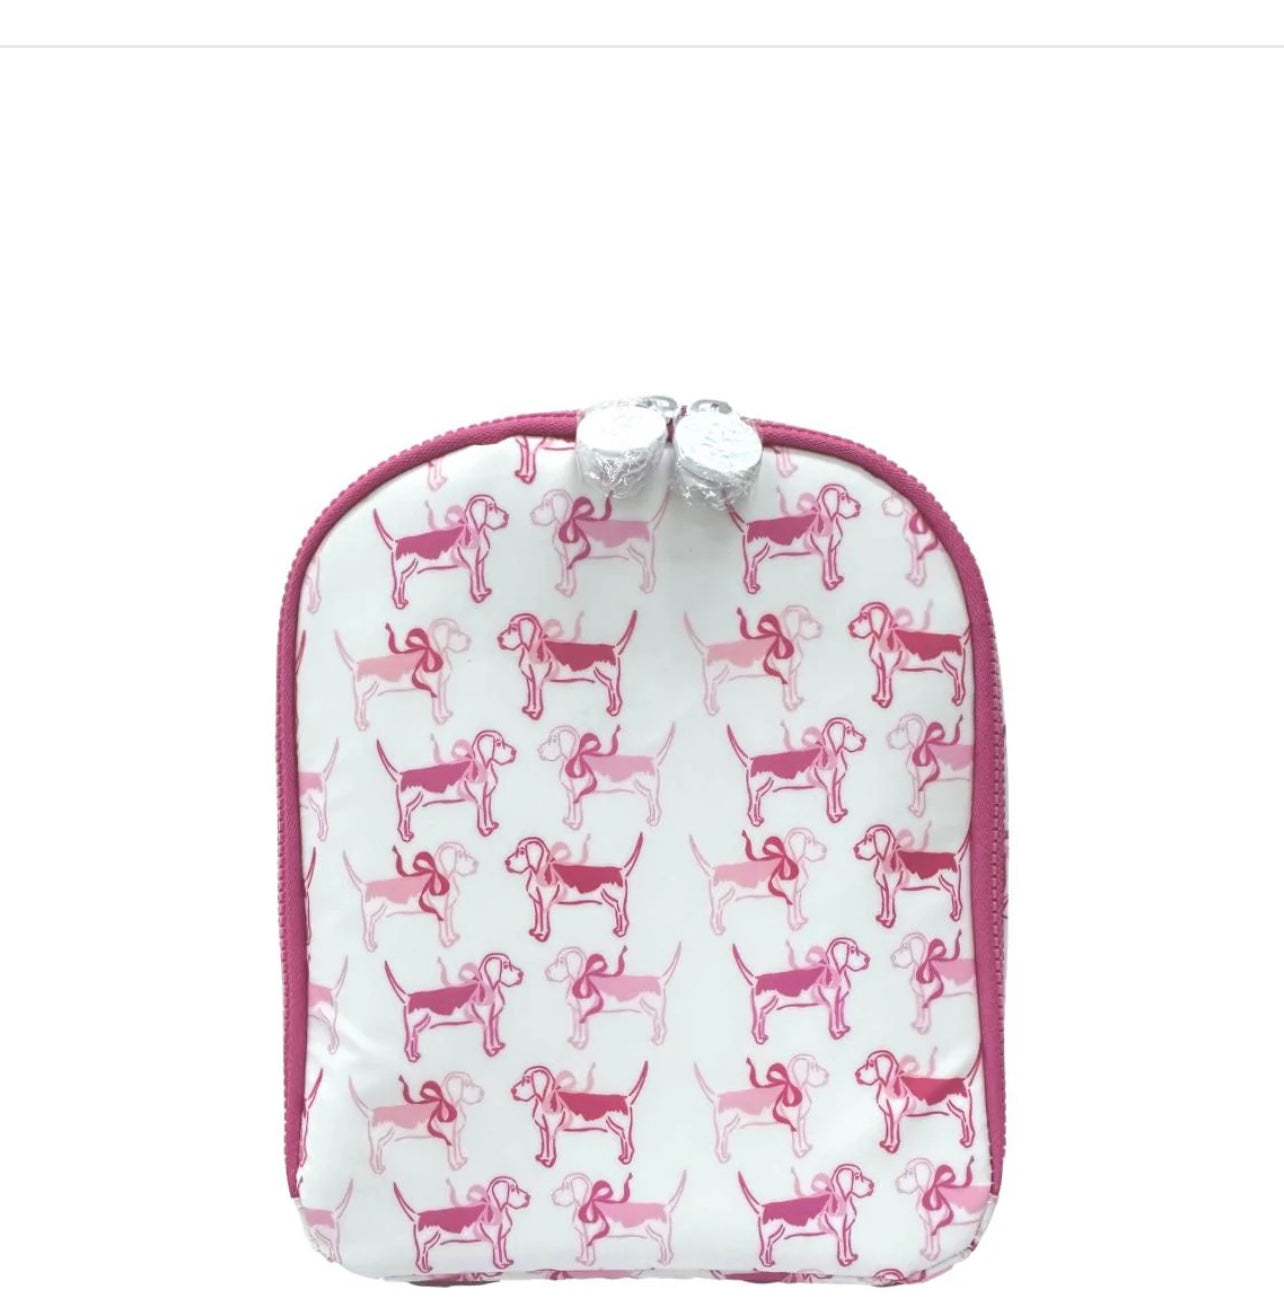 Lunch Bag- Puppy Love Pink *ships end of may